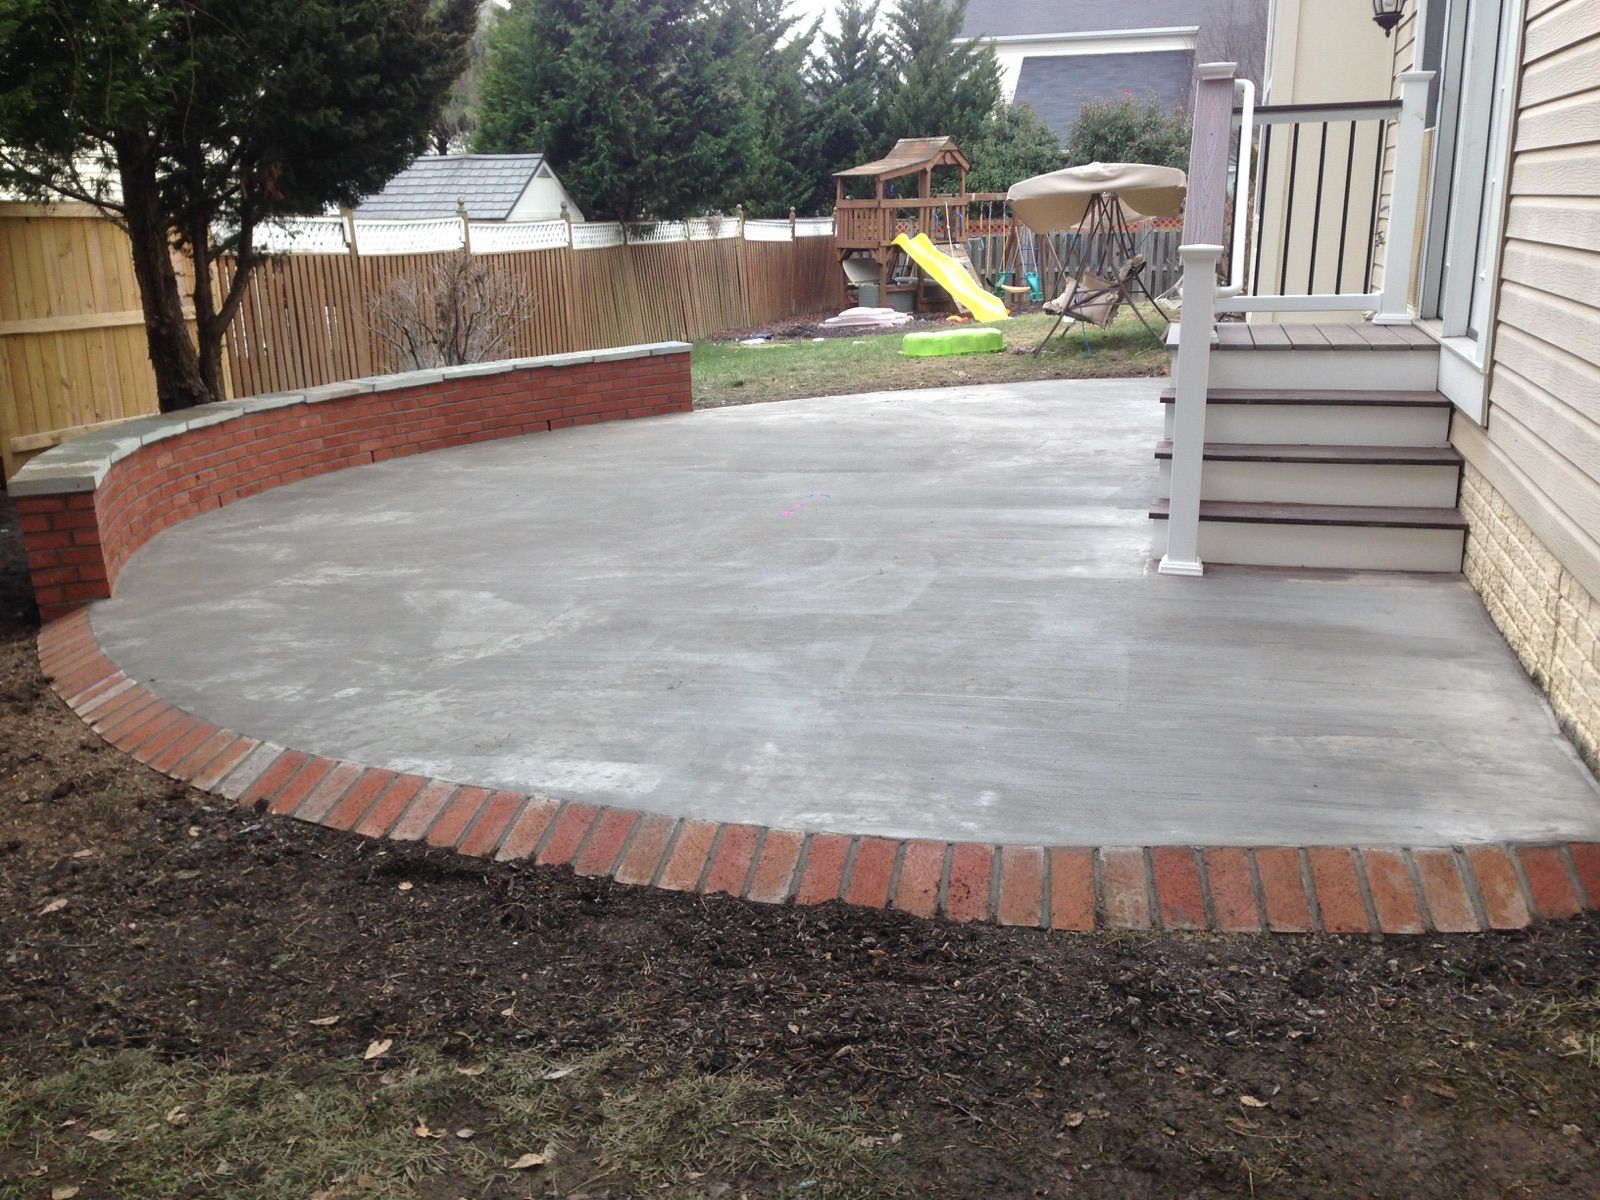 Concrete Patio With A Brick Seating Wall And Border In intended for dimensions 1600 X 1200